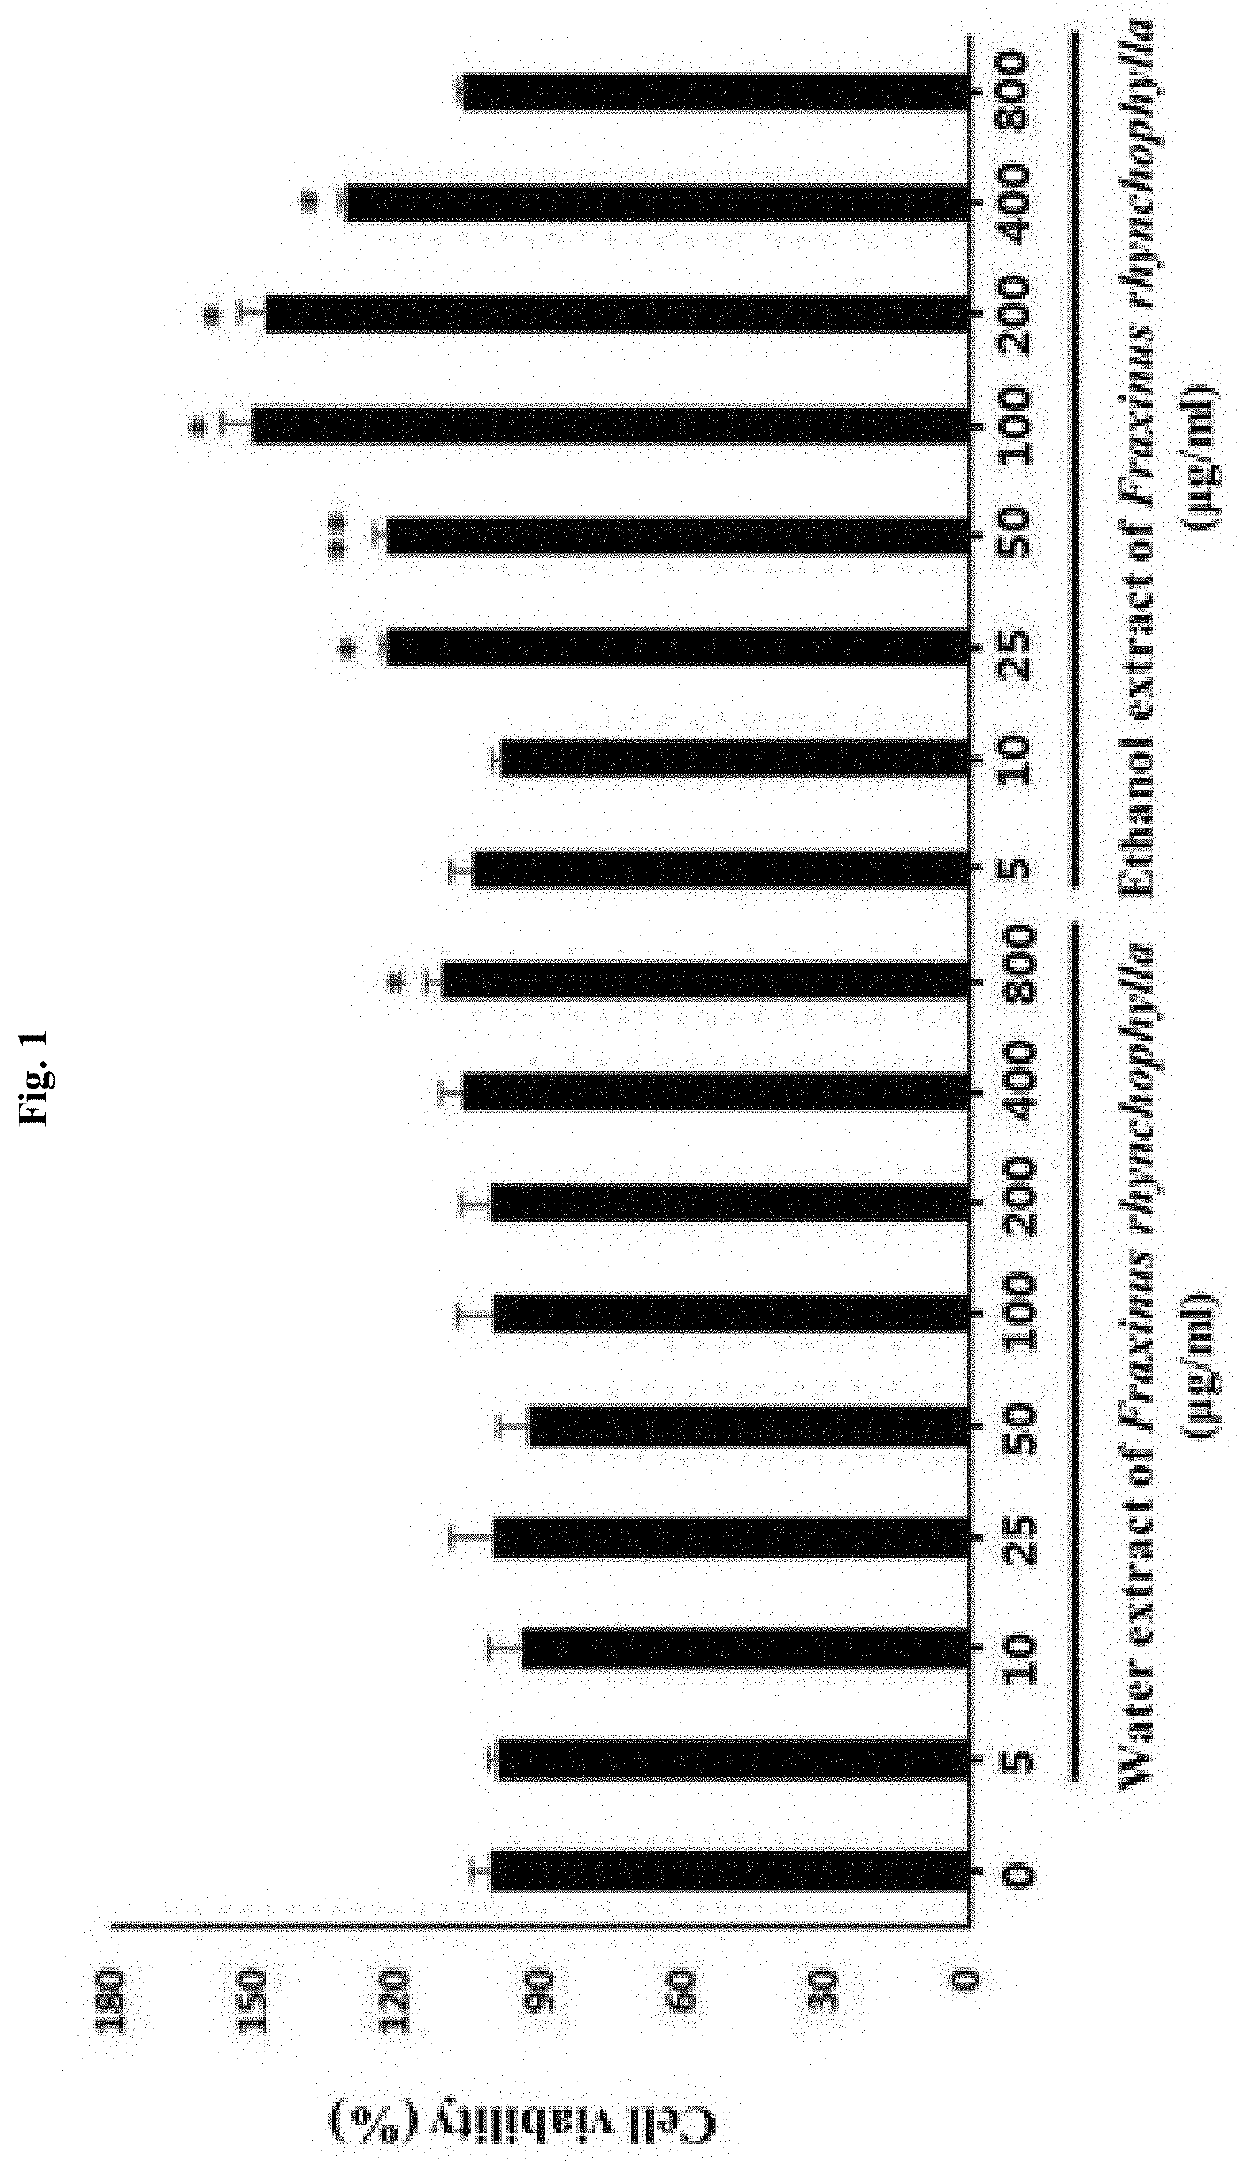 Composition for preventing, ameliorating, or treating depression and anxiety disorder comprising fraxinus rhynchophylla extract as effective ingredient